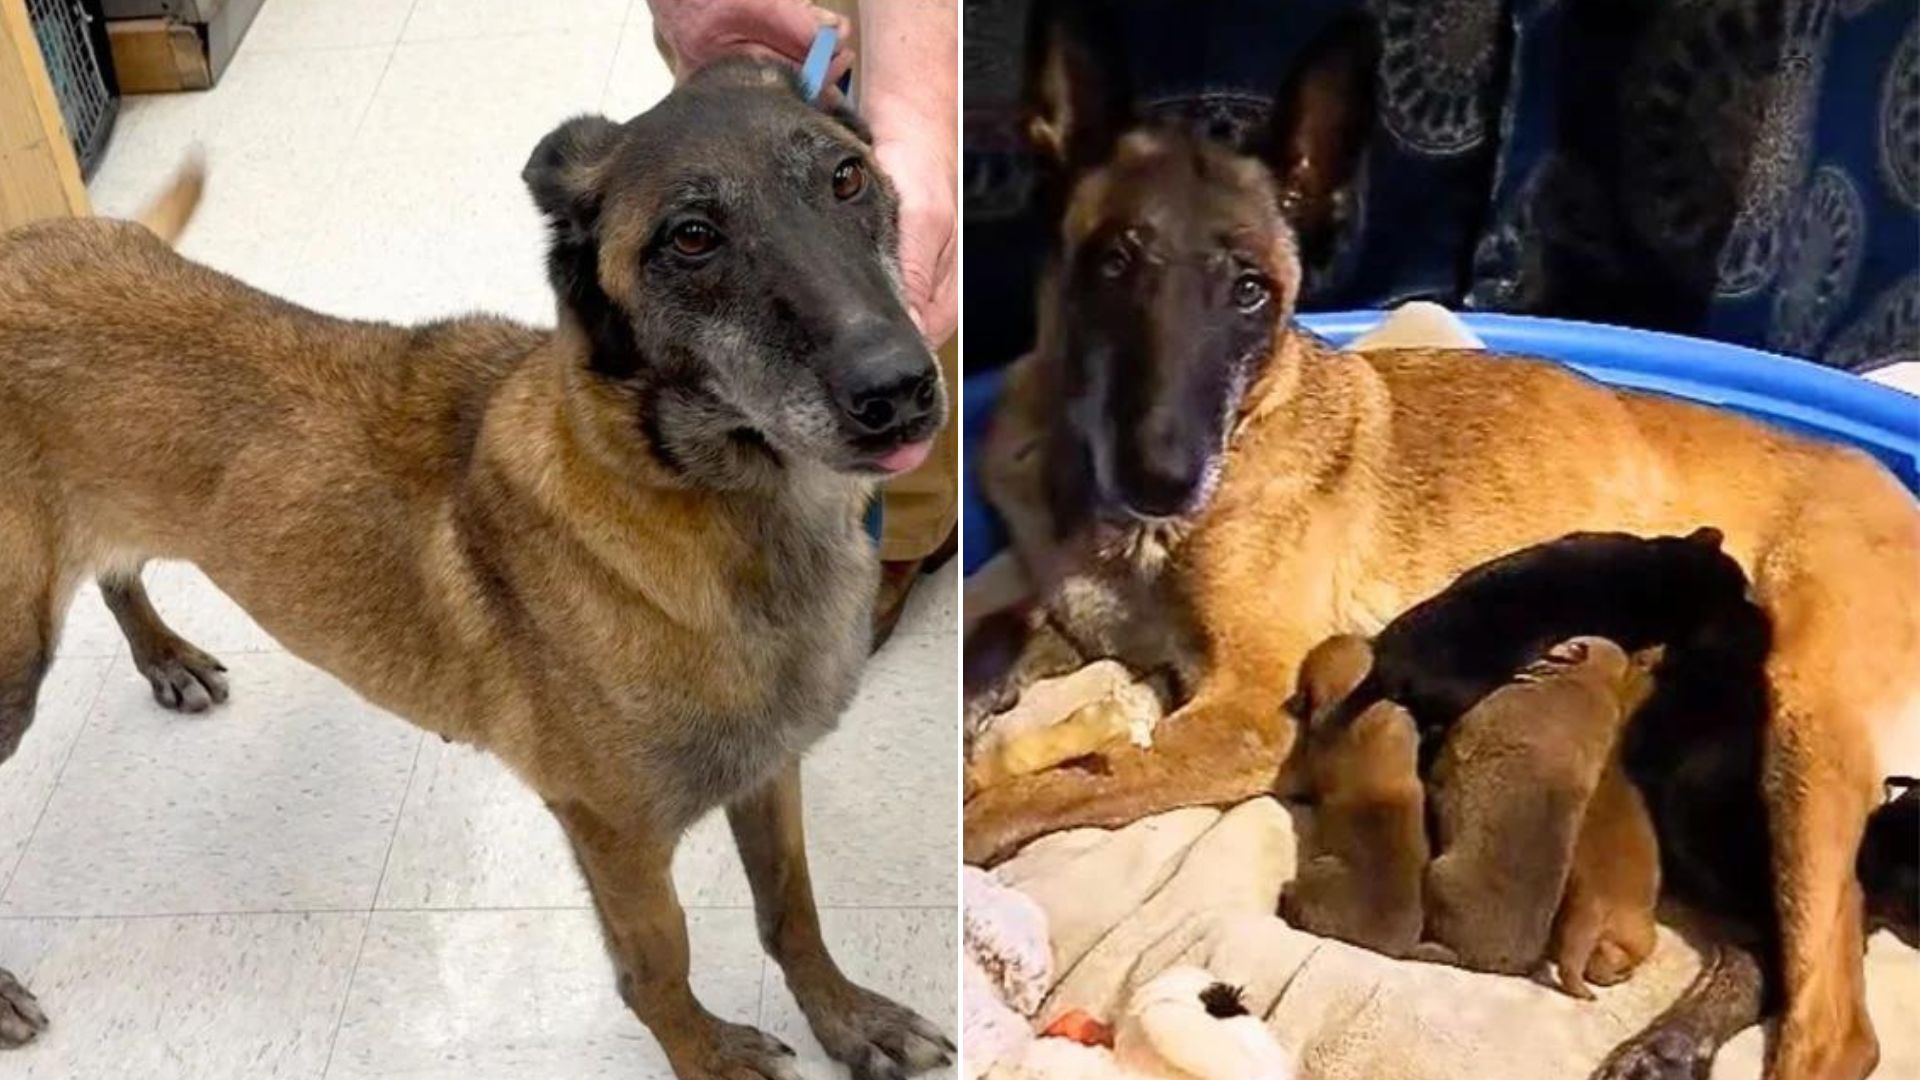 Severely Abused Dog Permanently Separated From Her Puppies As She Was ‘Too Dangerous’